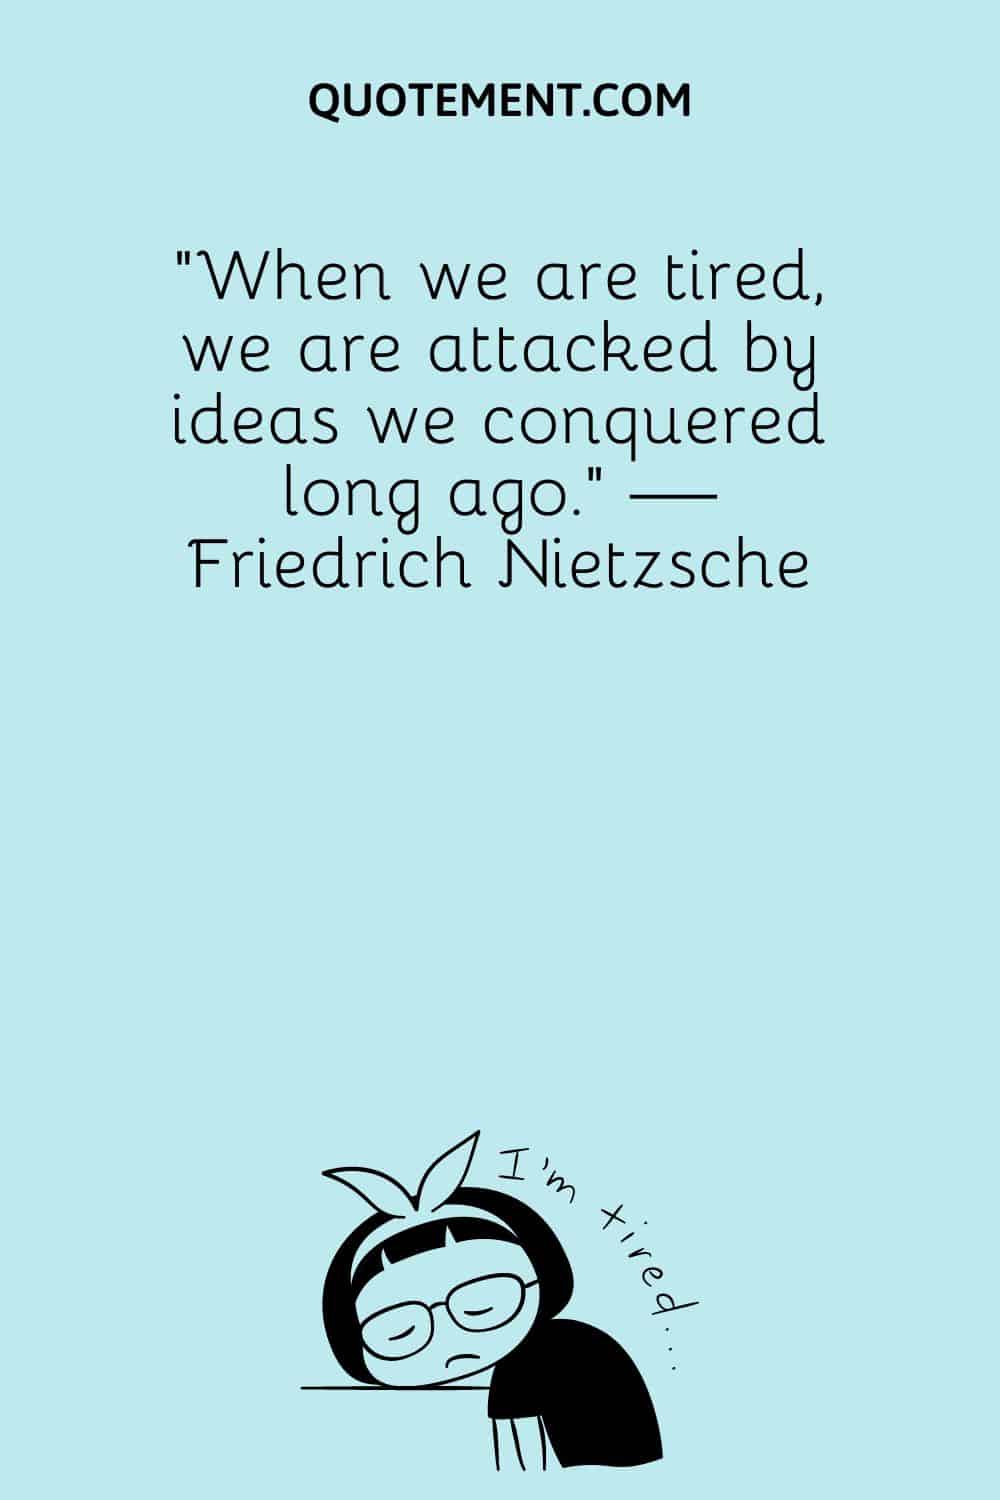 When we are tired, we are attacked by ideas we conquered long ago